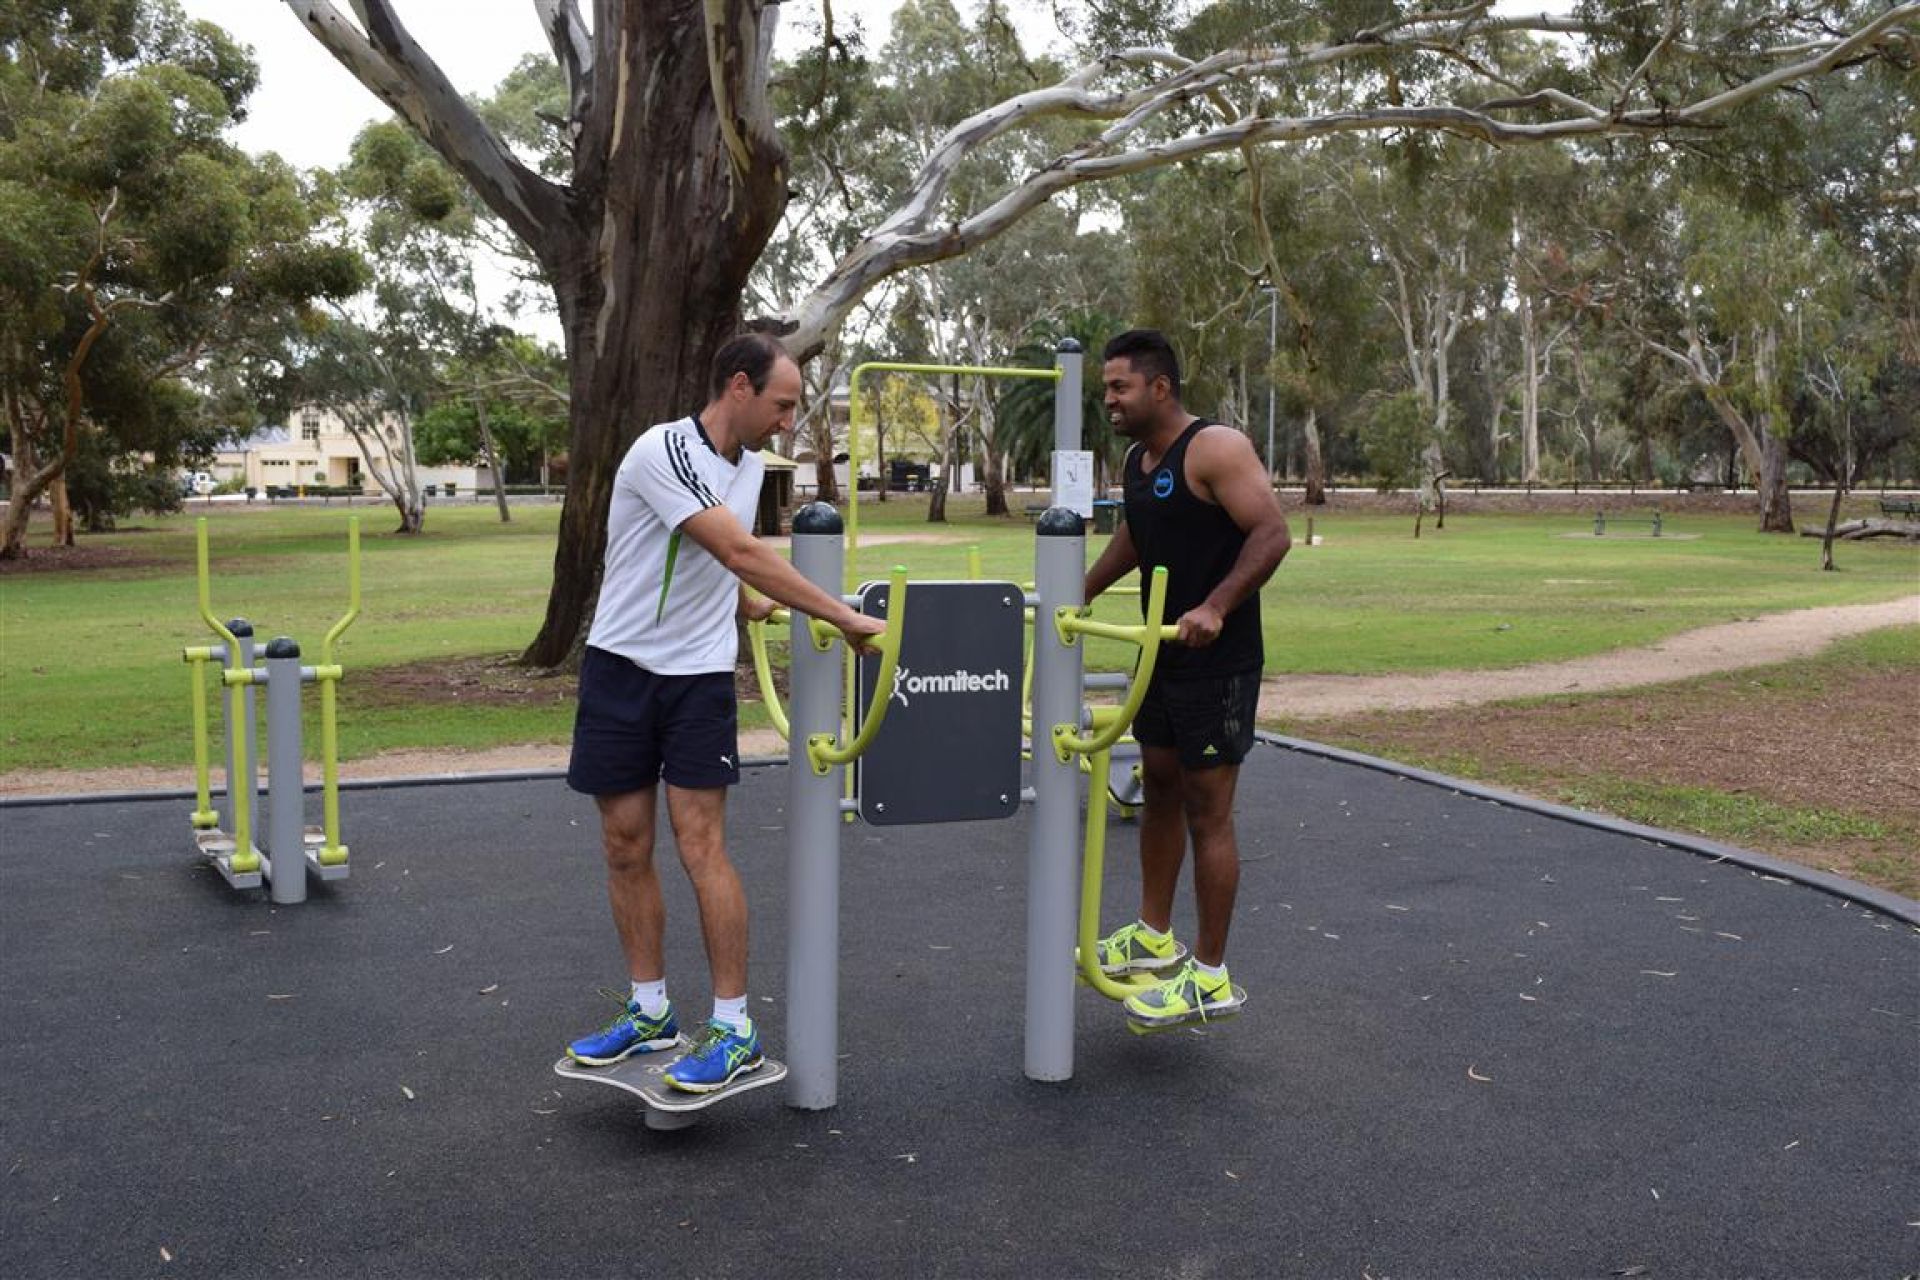 Fitness Equipment - The Gums Reserve